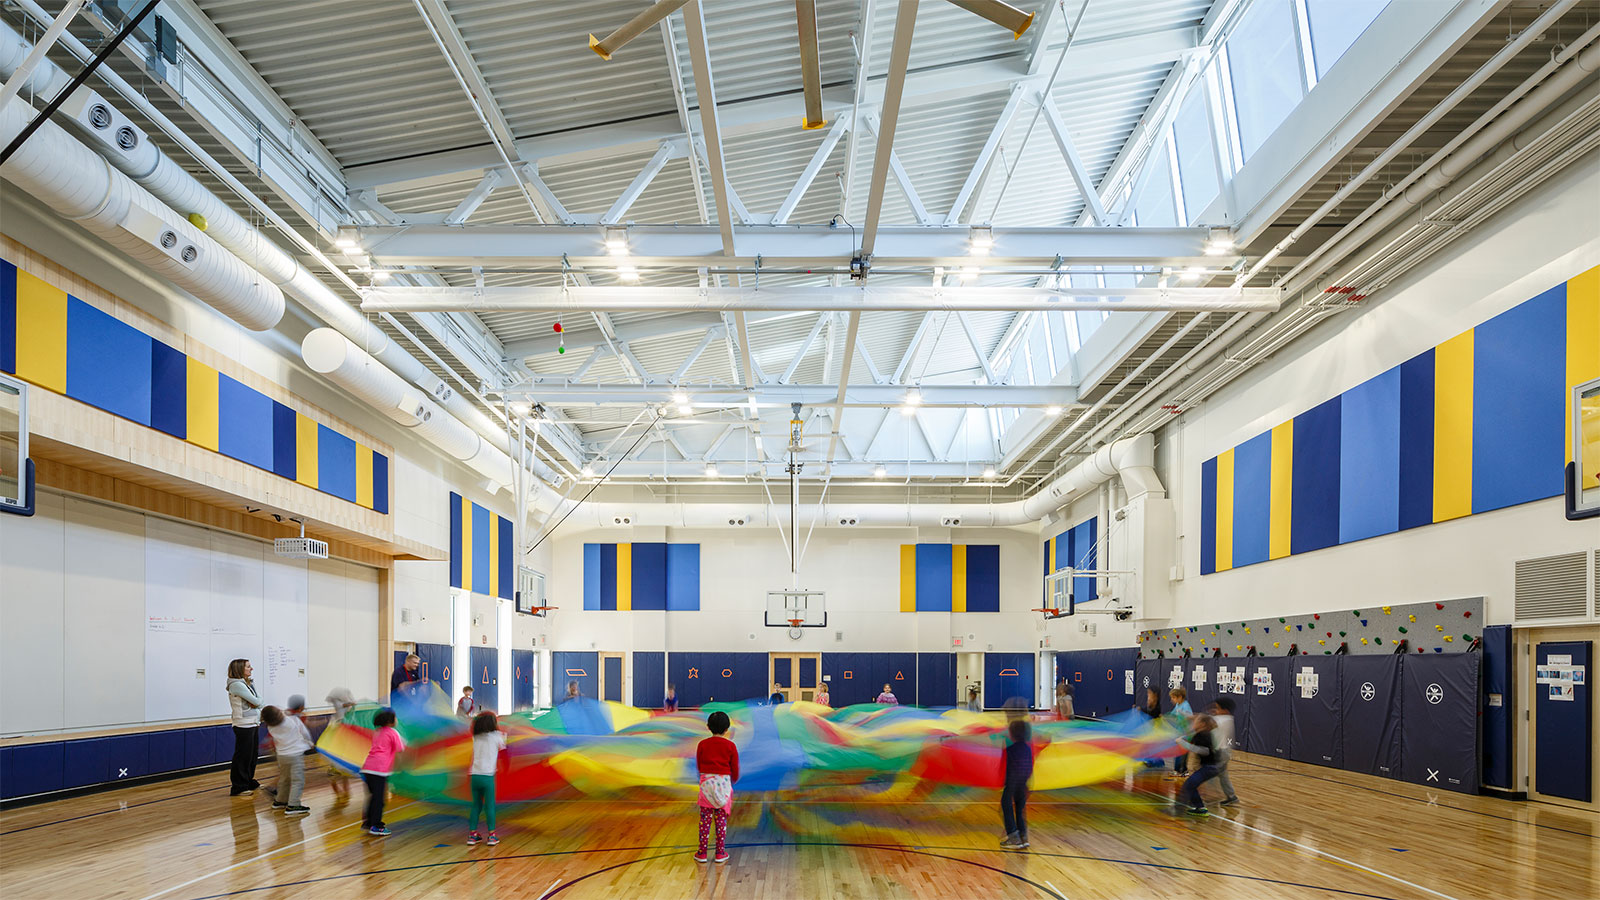 Children playing in a gym